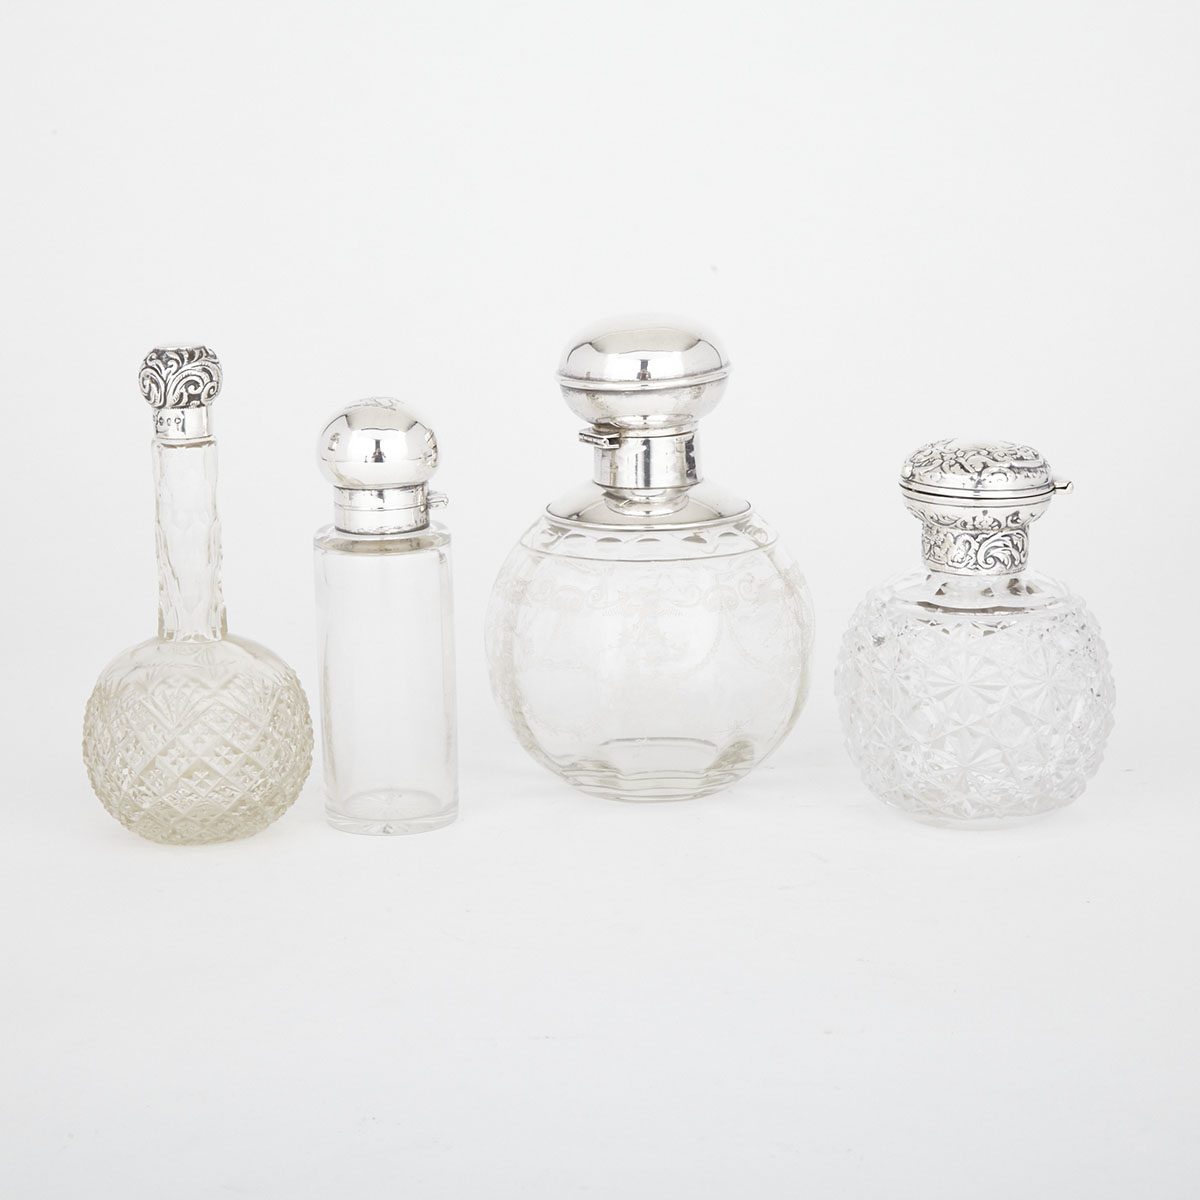 Four Victorian and Edwardian Silver Mounted Cut or Etched Glass Perfume and Toilet Water Bottles, London and Birmingham, 1897-1914